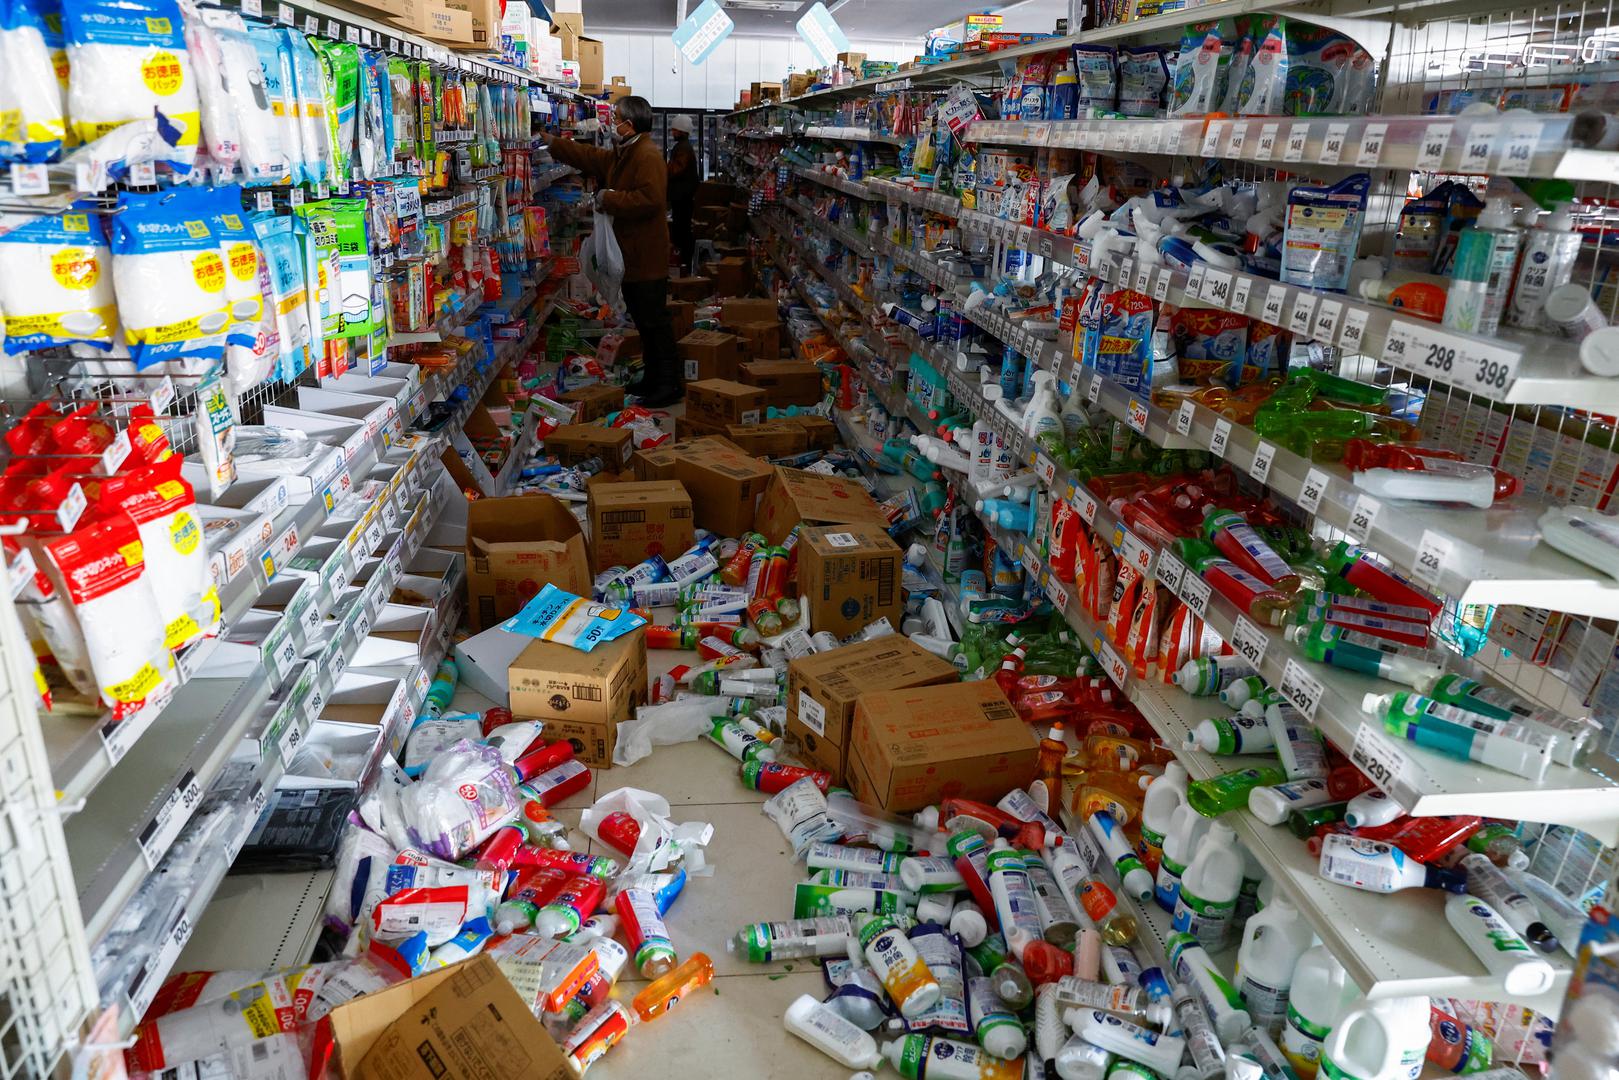 People pick up items from the shelves of a damaged drugstore after receiving permission to take goods for free, in the aftermath of an earthquake, in Anamizu, Ishikawa prefecture, Japan January 2, 2024, REUTERS/Kim Kyung-Hoon Photo: KIM KYUNG-HOON/REUTERS